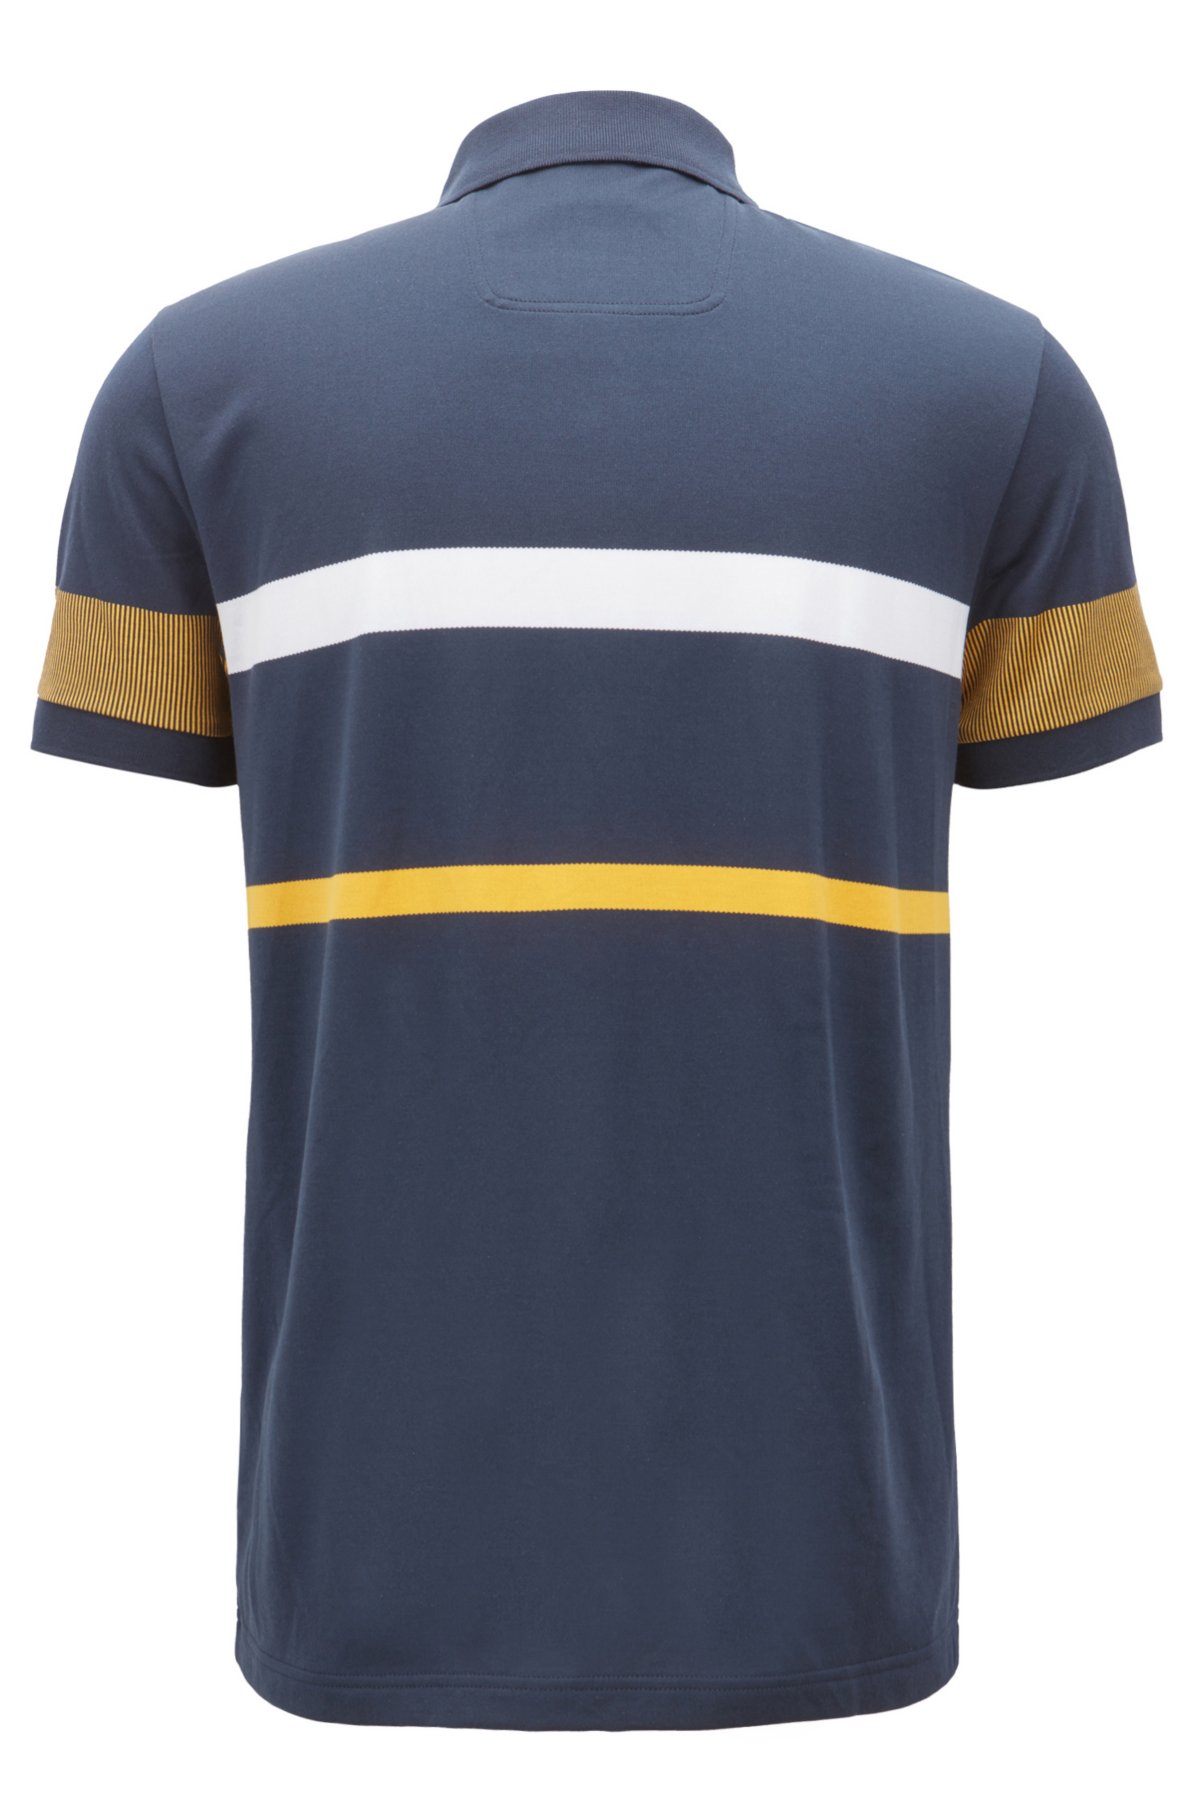 Ambacht brandstof schroot BOSS - Slim-fit polo shirt with color-block stripes